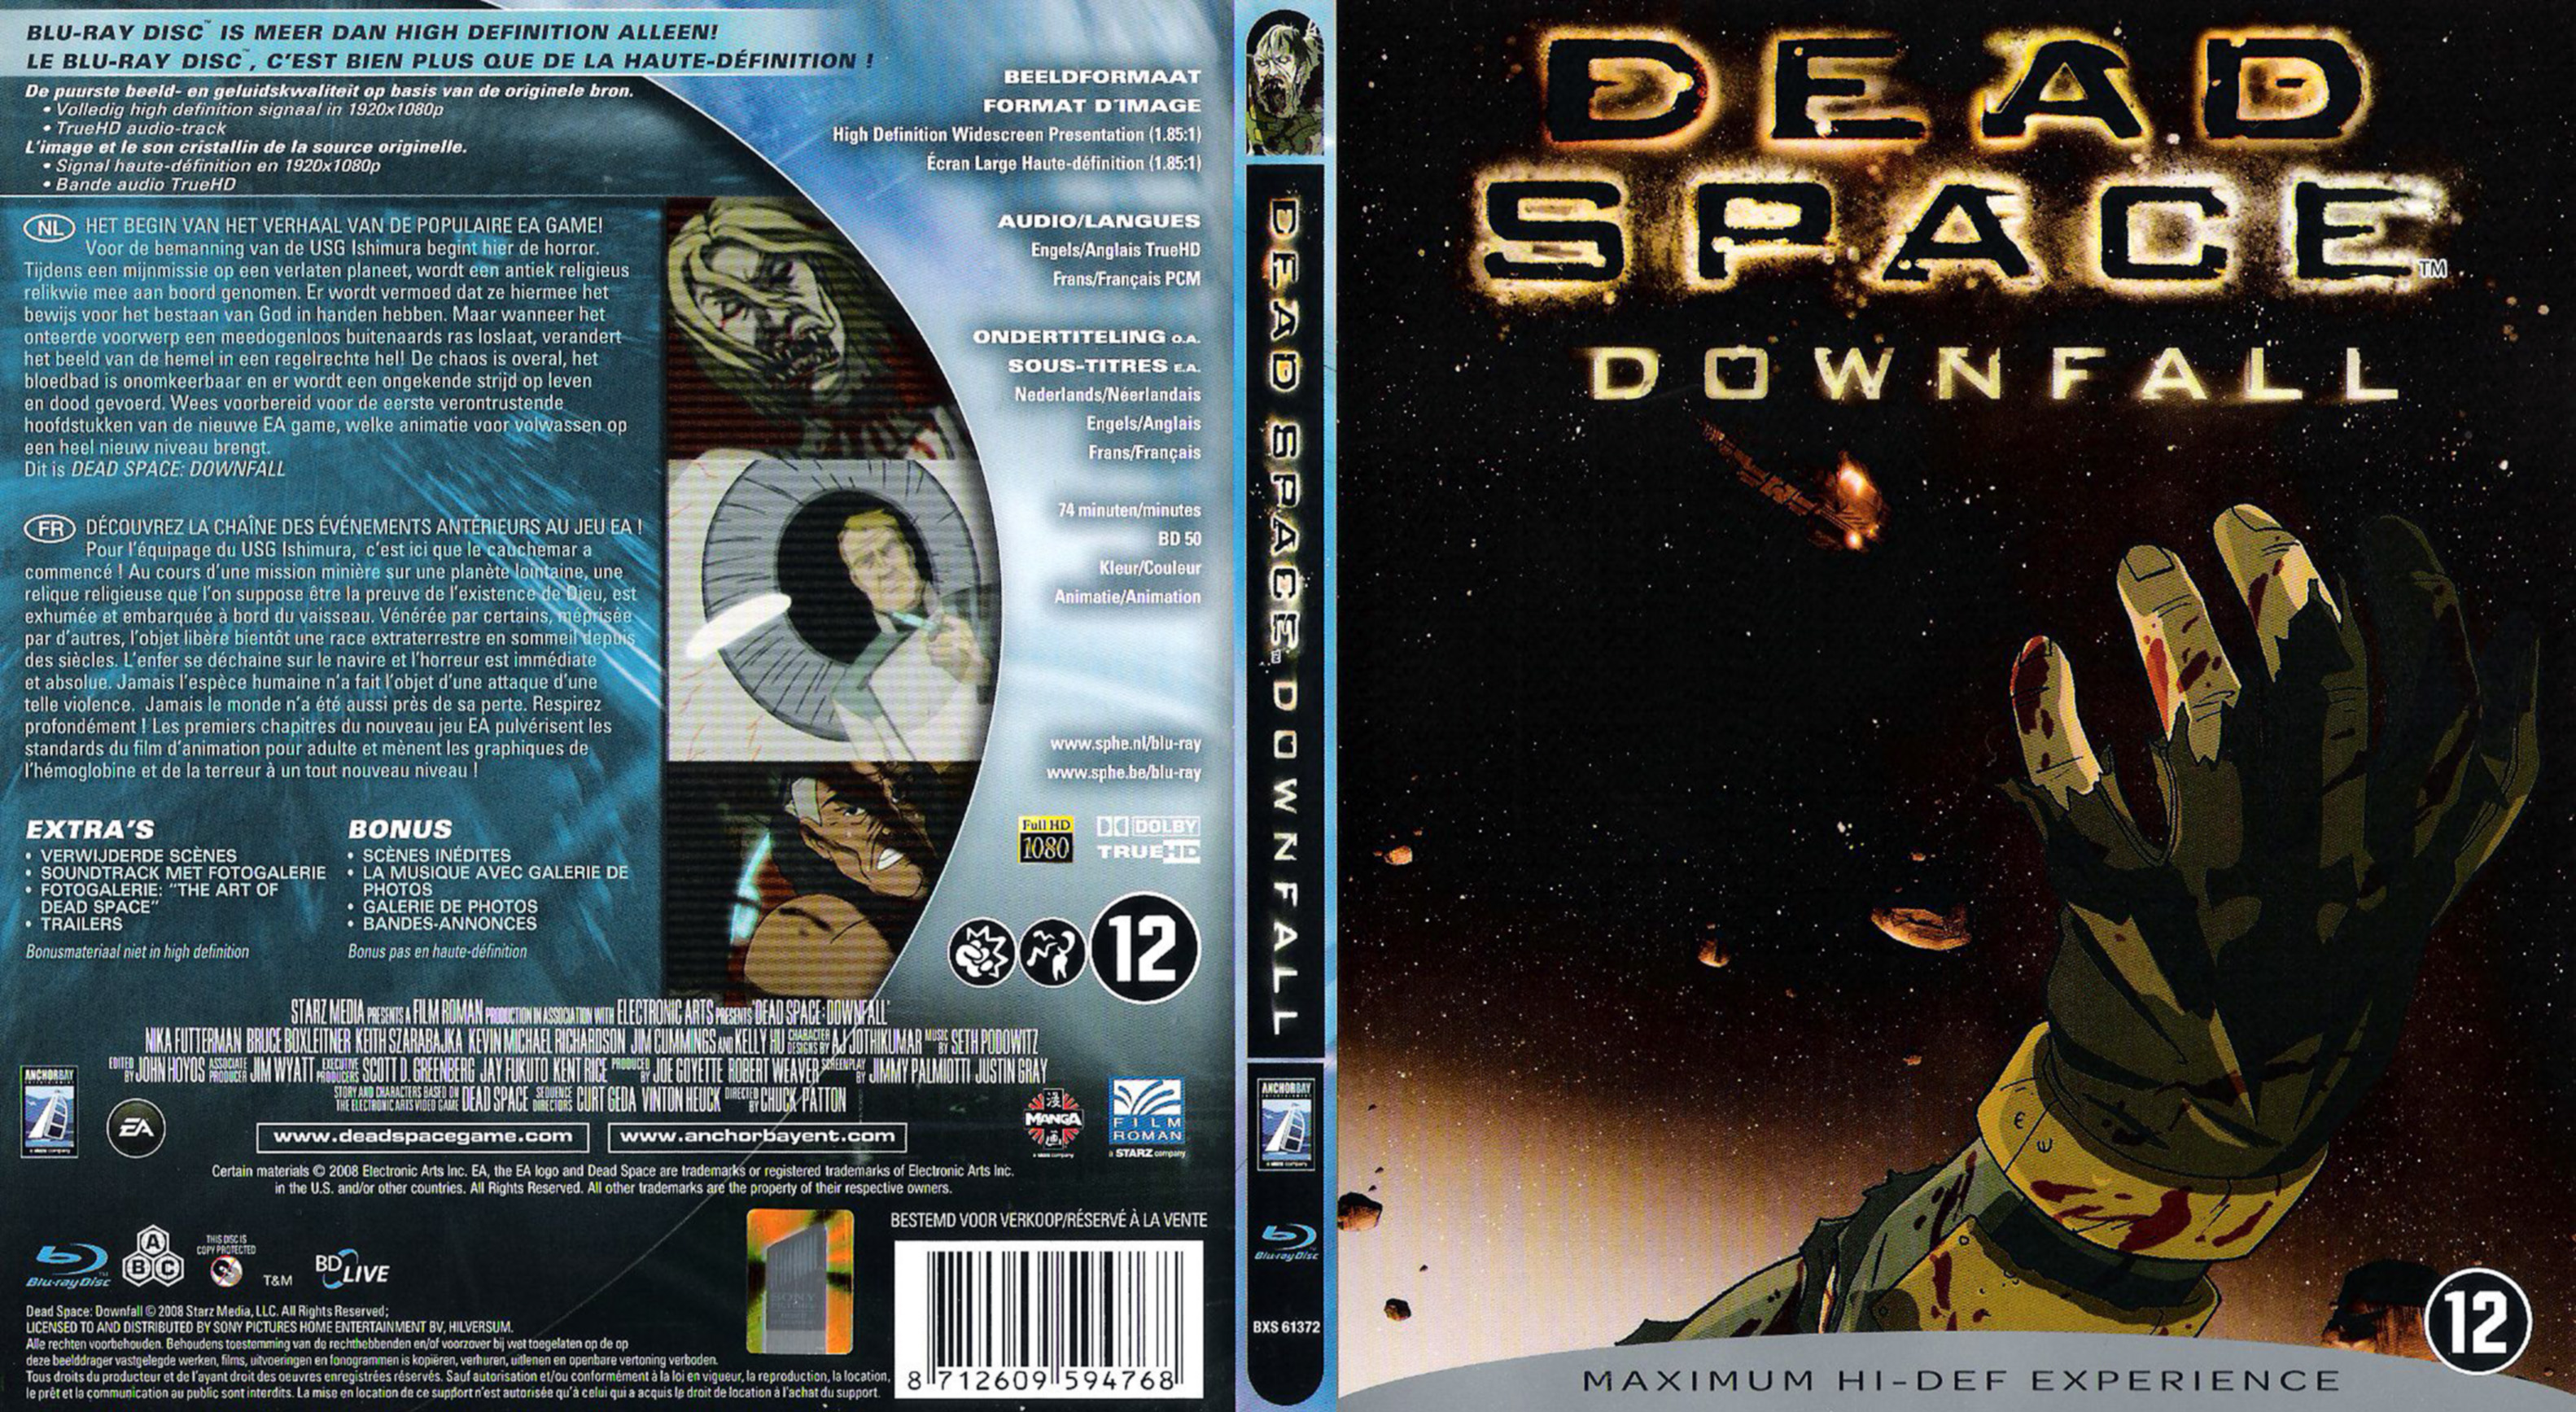 Jaquette DVD Dead space downfall (BLU-RAY)